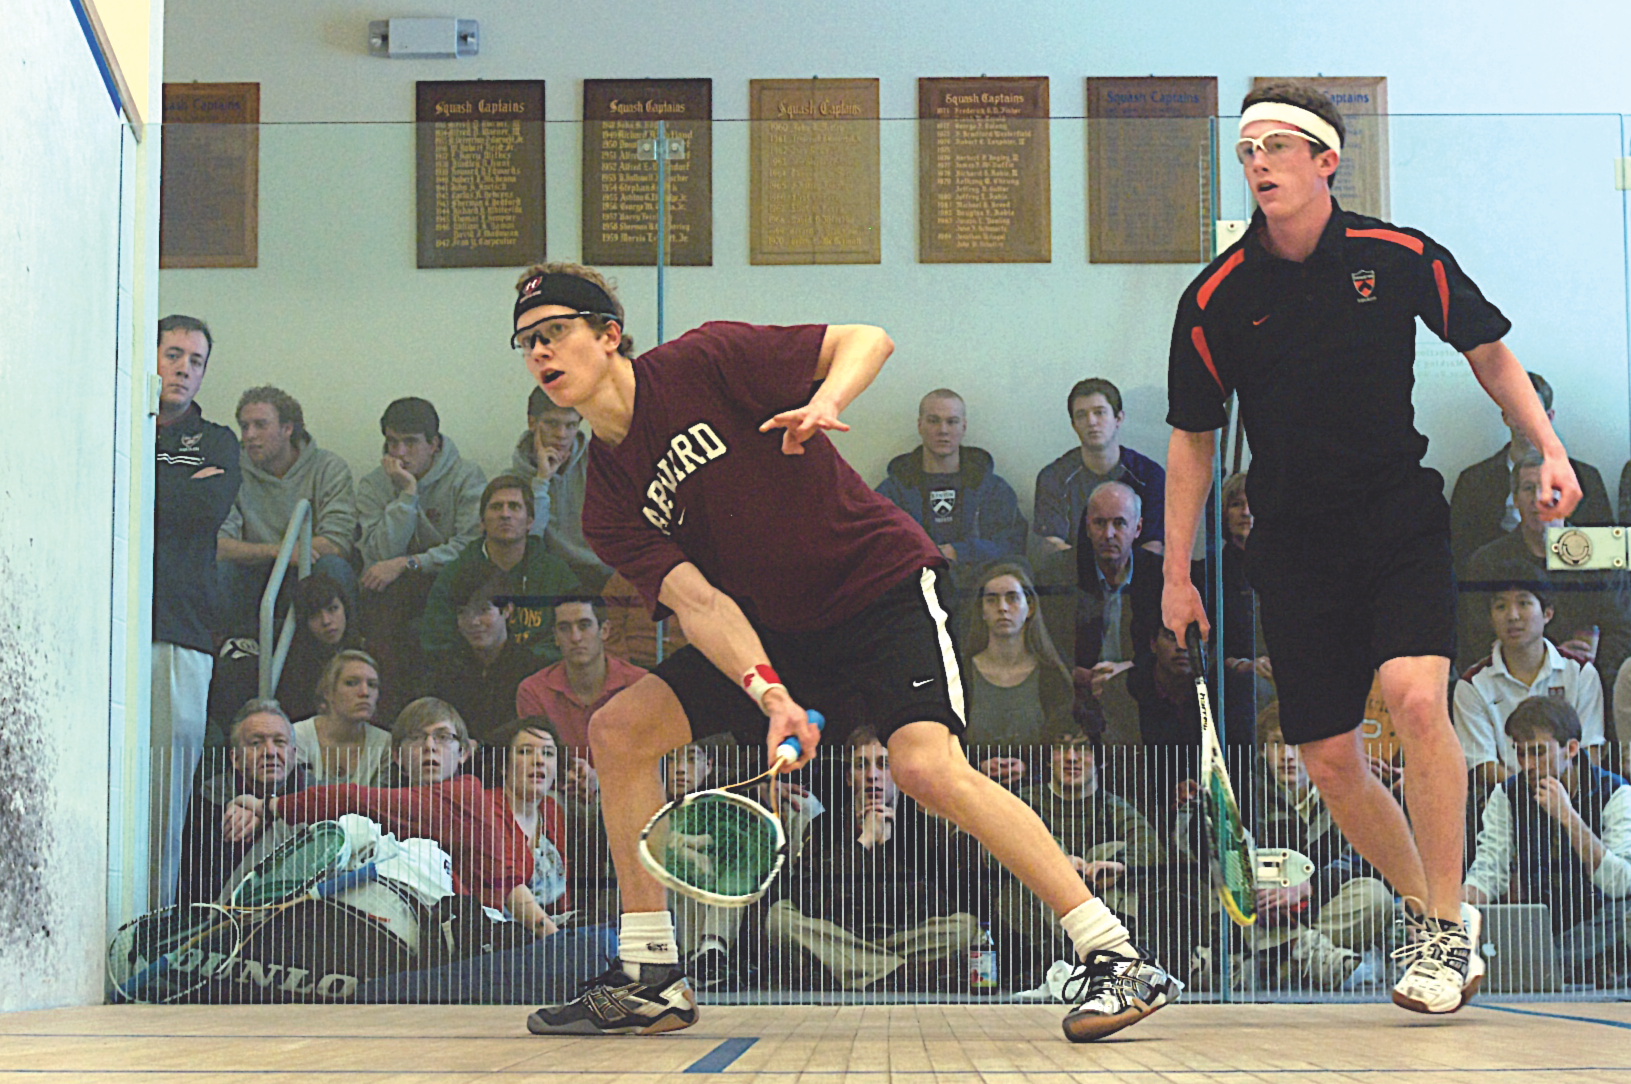 Harvard’s men were led all season by No. 1 Colin West (right), but his was the only win for the Crimson against Princeton in the team quarterfinals (over freshman Todd Harrity). Kenyon College captured the Chaffee Division and got things rolling in the quarterfinals by beating Boston College 7-2. Kenyon’s Danilo Lobo Diaz beat BC’s Philipe Katz (opposite, left) 3-0 and then came through in a clutch performance in the finals over California. Hosts Yale narrowly defeated Rochester in the Potter semifinals, including No. 9 Chris Plimpton (opposite, right in white shirt) overcoming the loss of the first game to Juan Pablo Gaviria on his way to winning, 3-1. Yale’s depth carried the day for the Bulldogs as each of the No. 7-9 positions won.